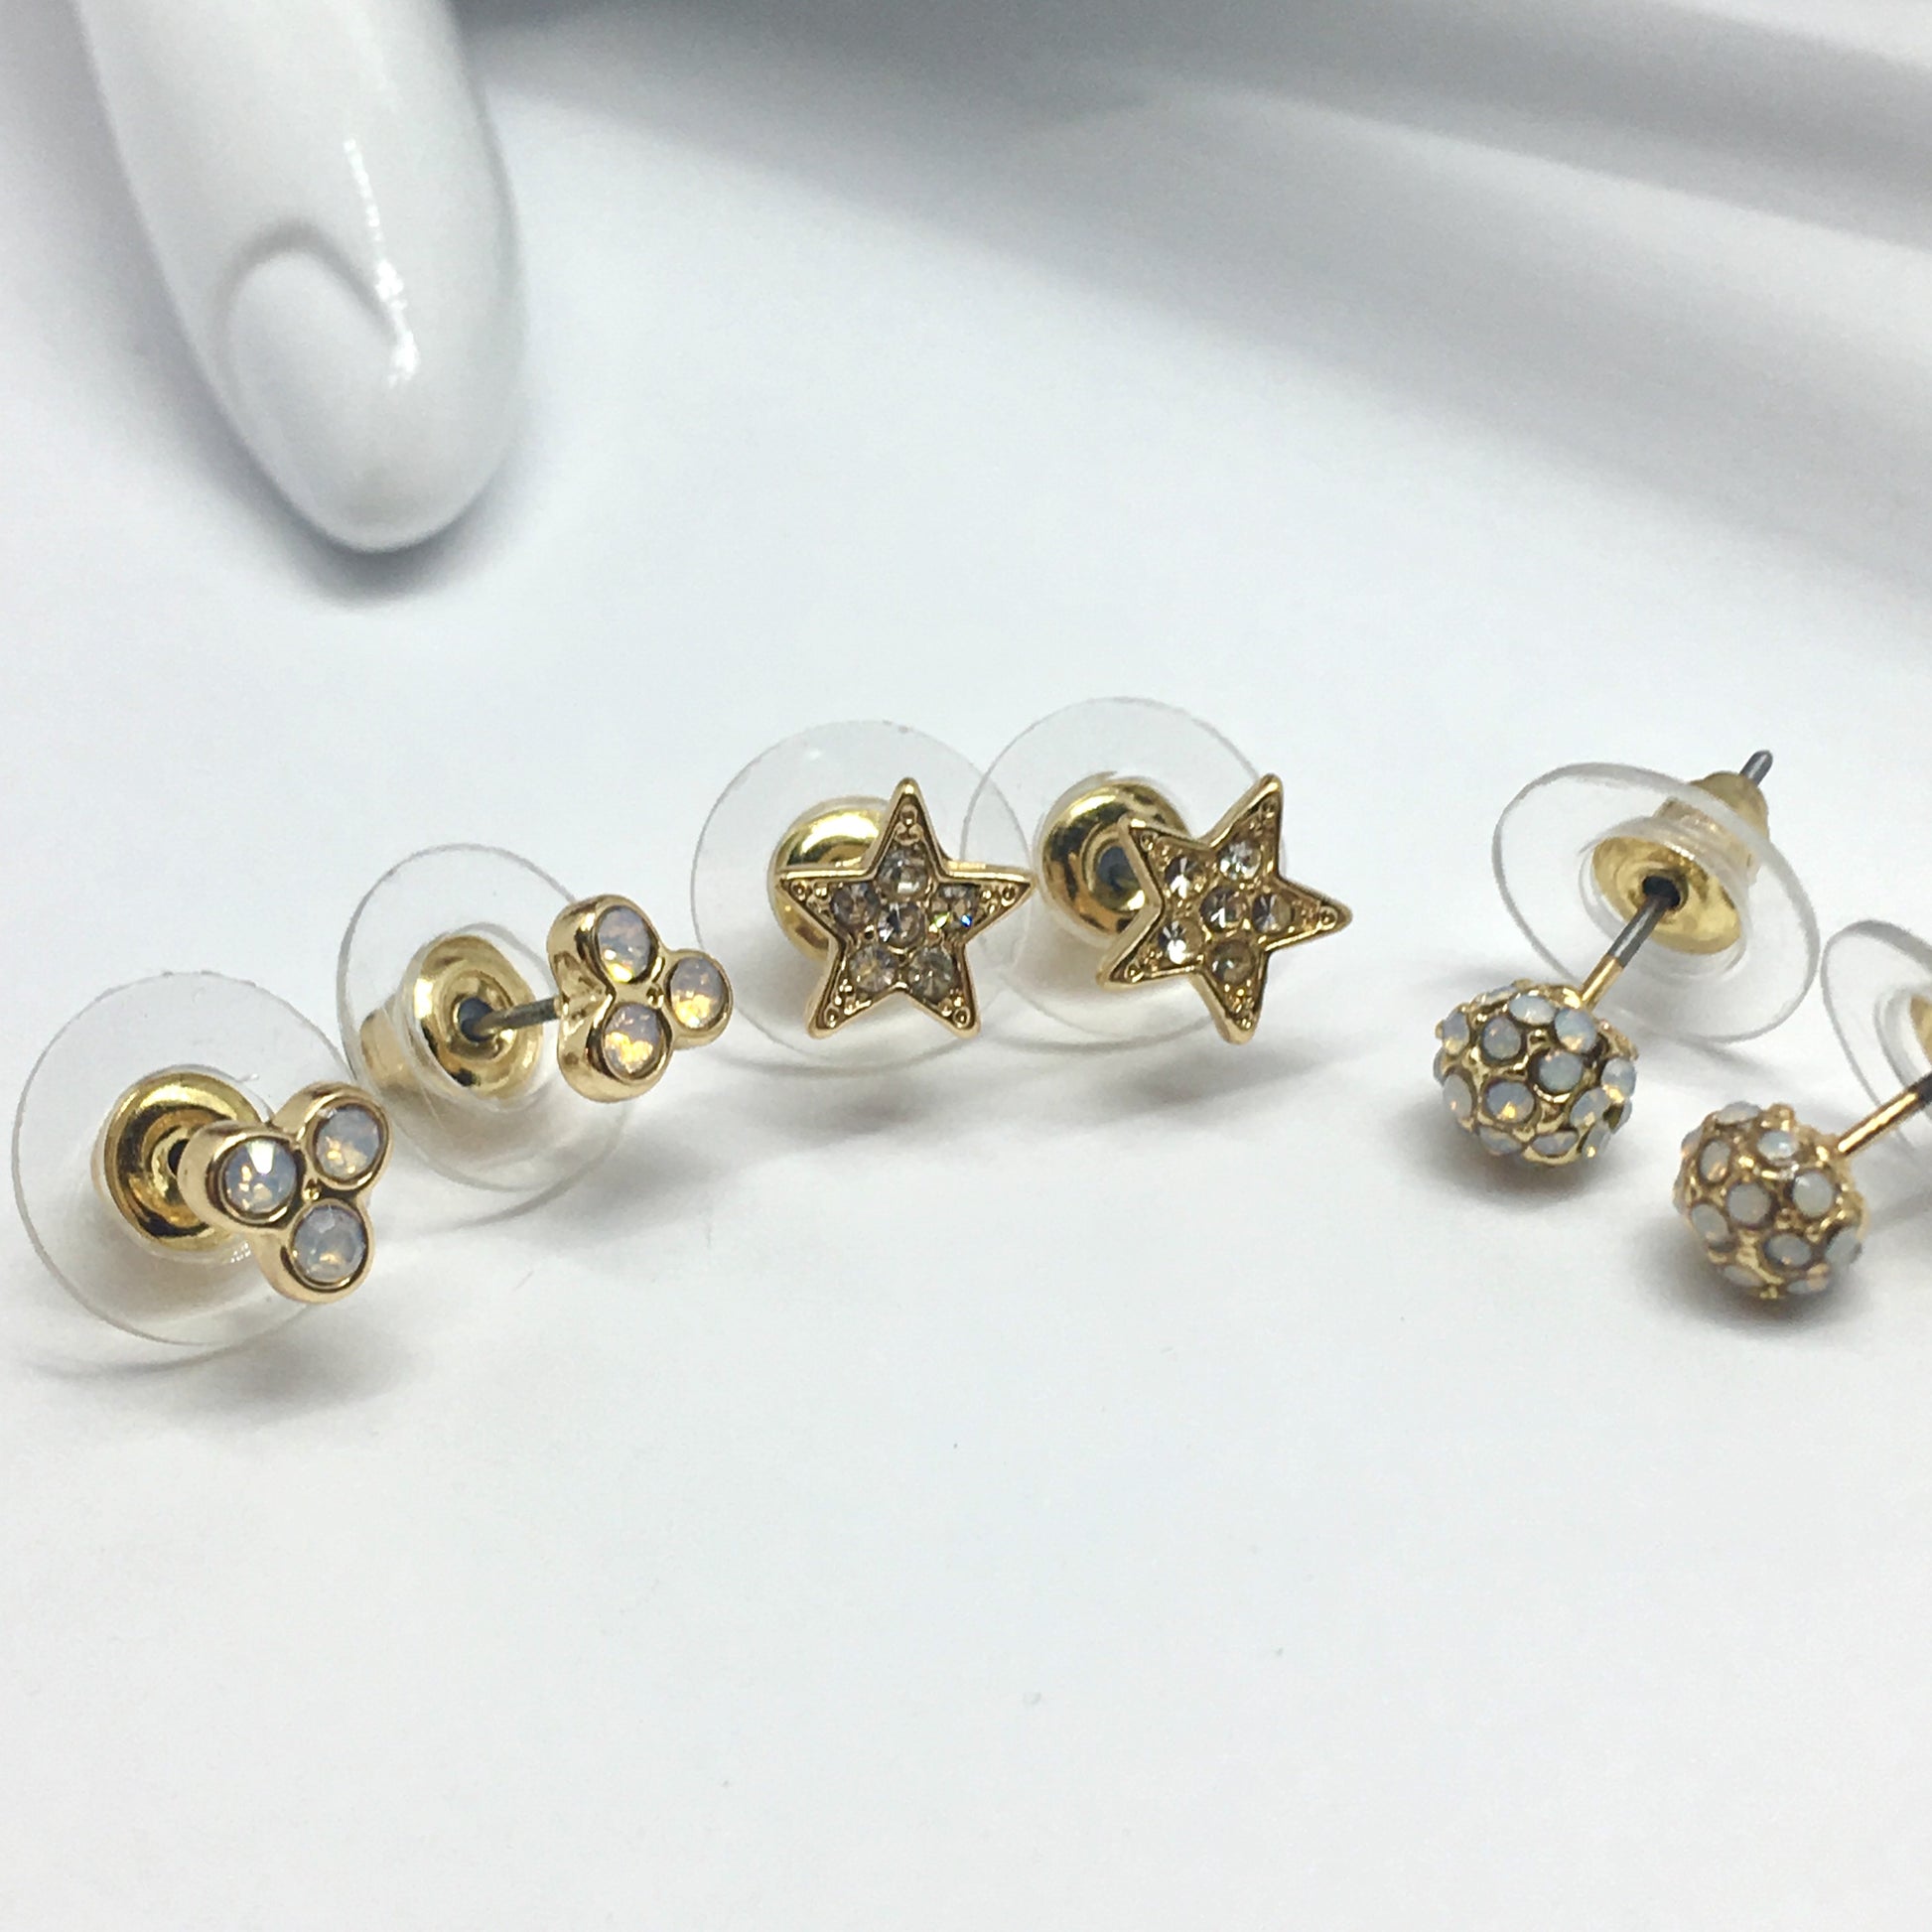 Fashion Jewelry - 3 Pairs Gold Star, Moon Orb, Clover Design Crystal Stud Earrings